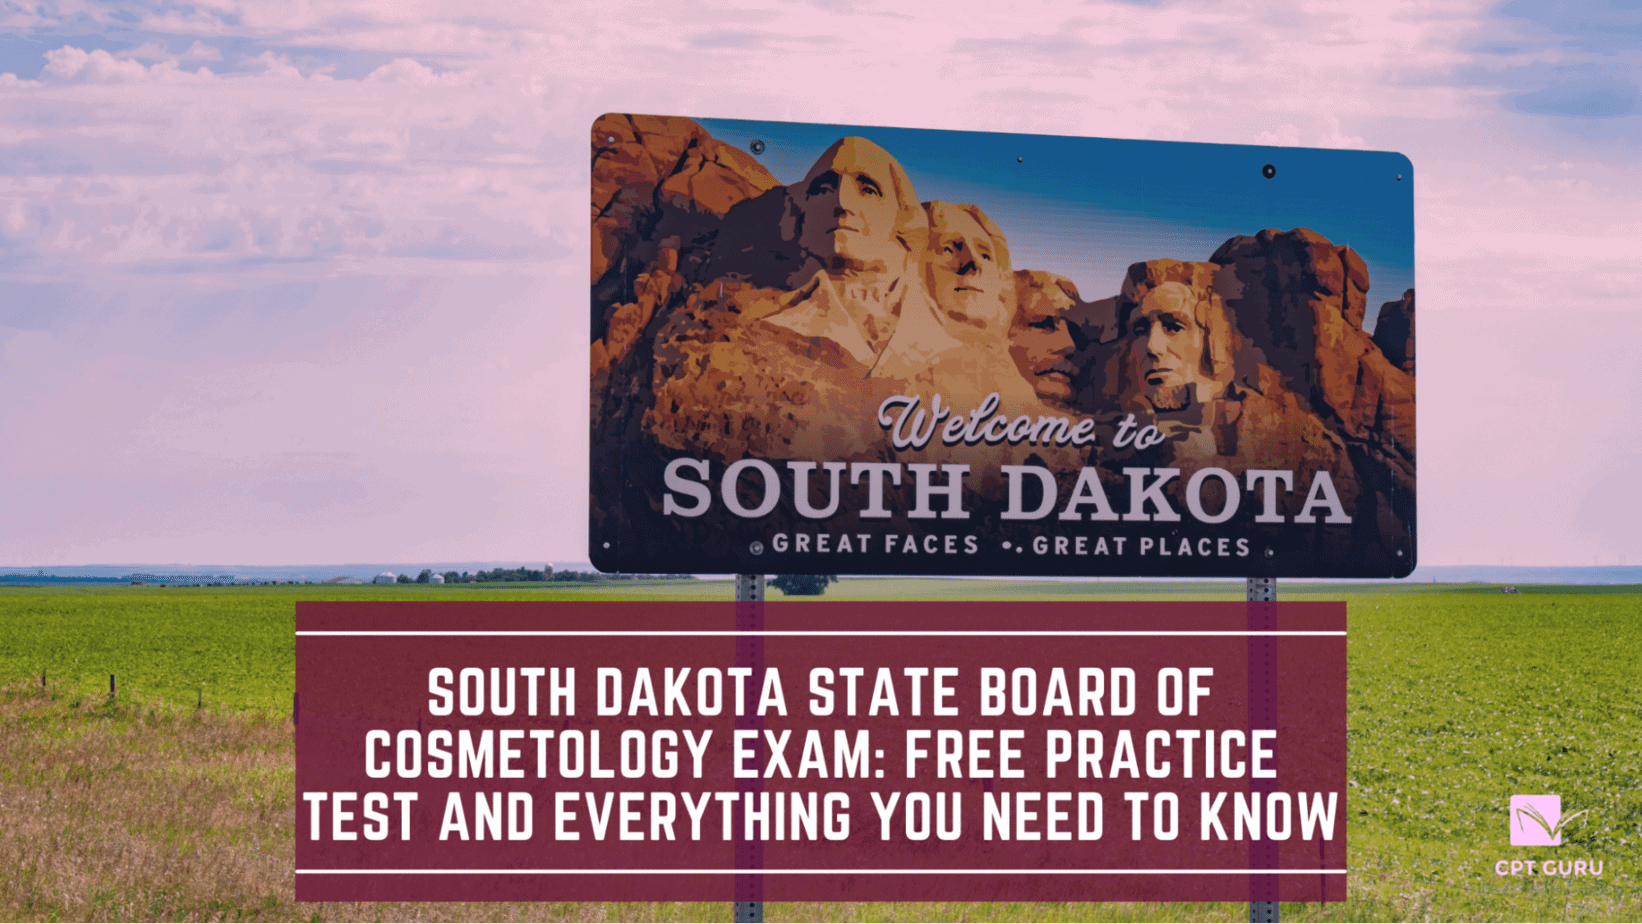 South Dakota State Board of Cosmetology Exam: Free Practice Test and Everything you Need to Know